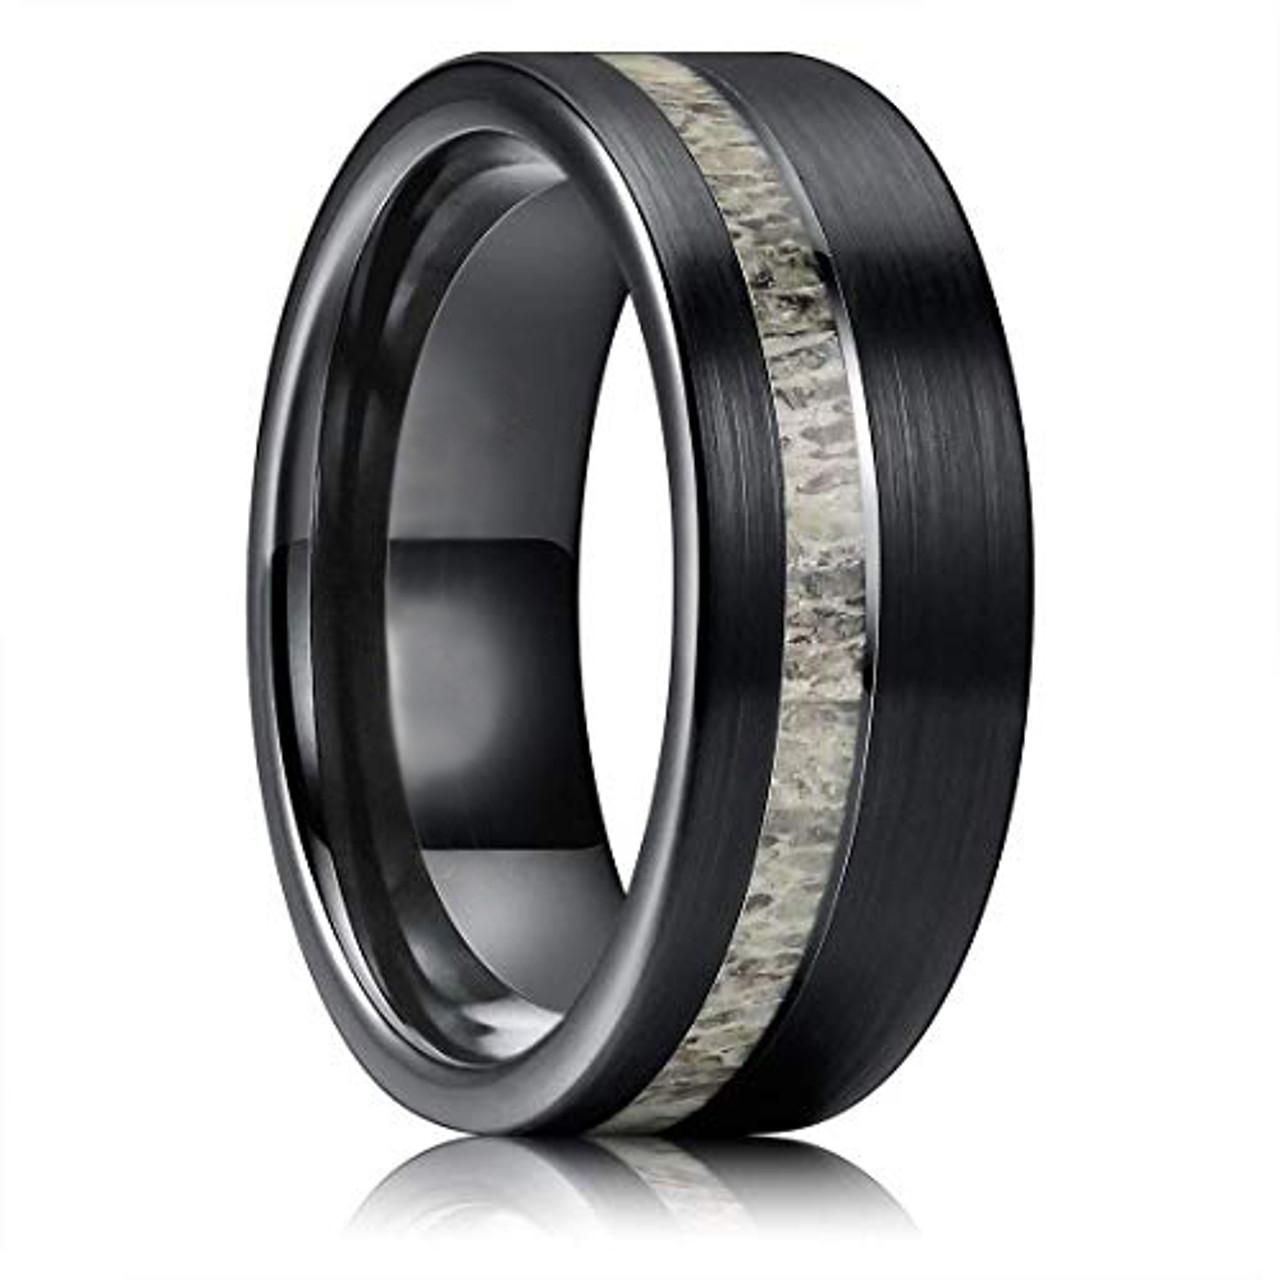 (8mm)  Unisex or Men's Tungsten Carbide Wedding ring band. Black with White Antler Inlay Ring. Tungsten Carbide Ring Comfort Fit